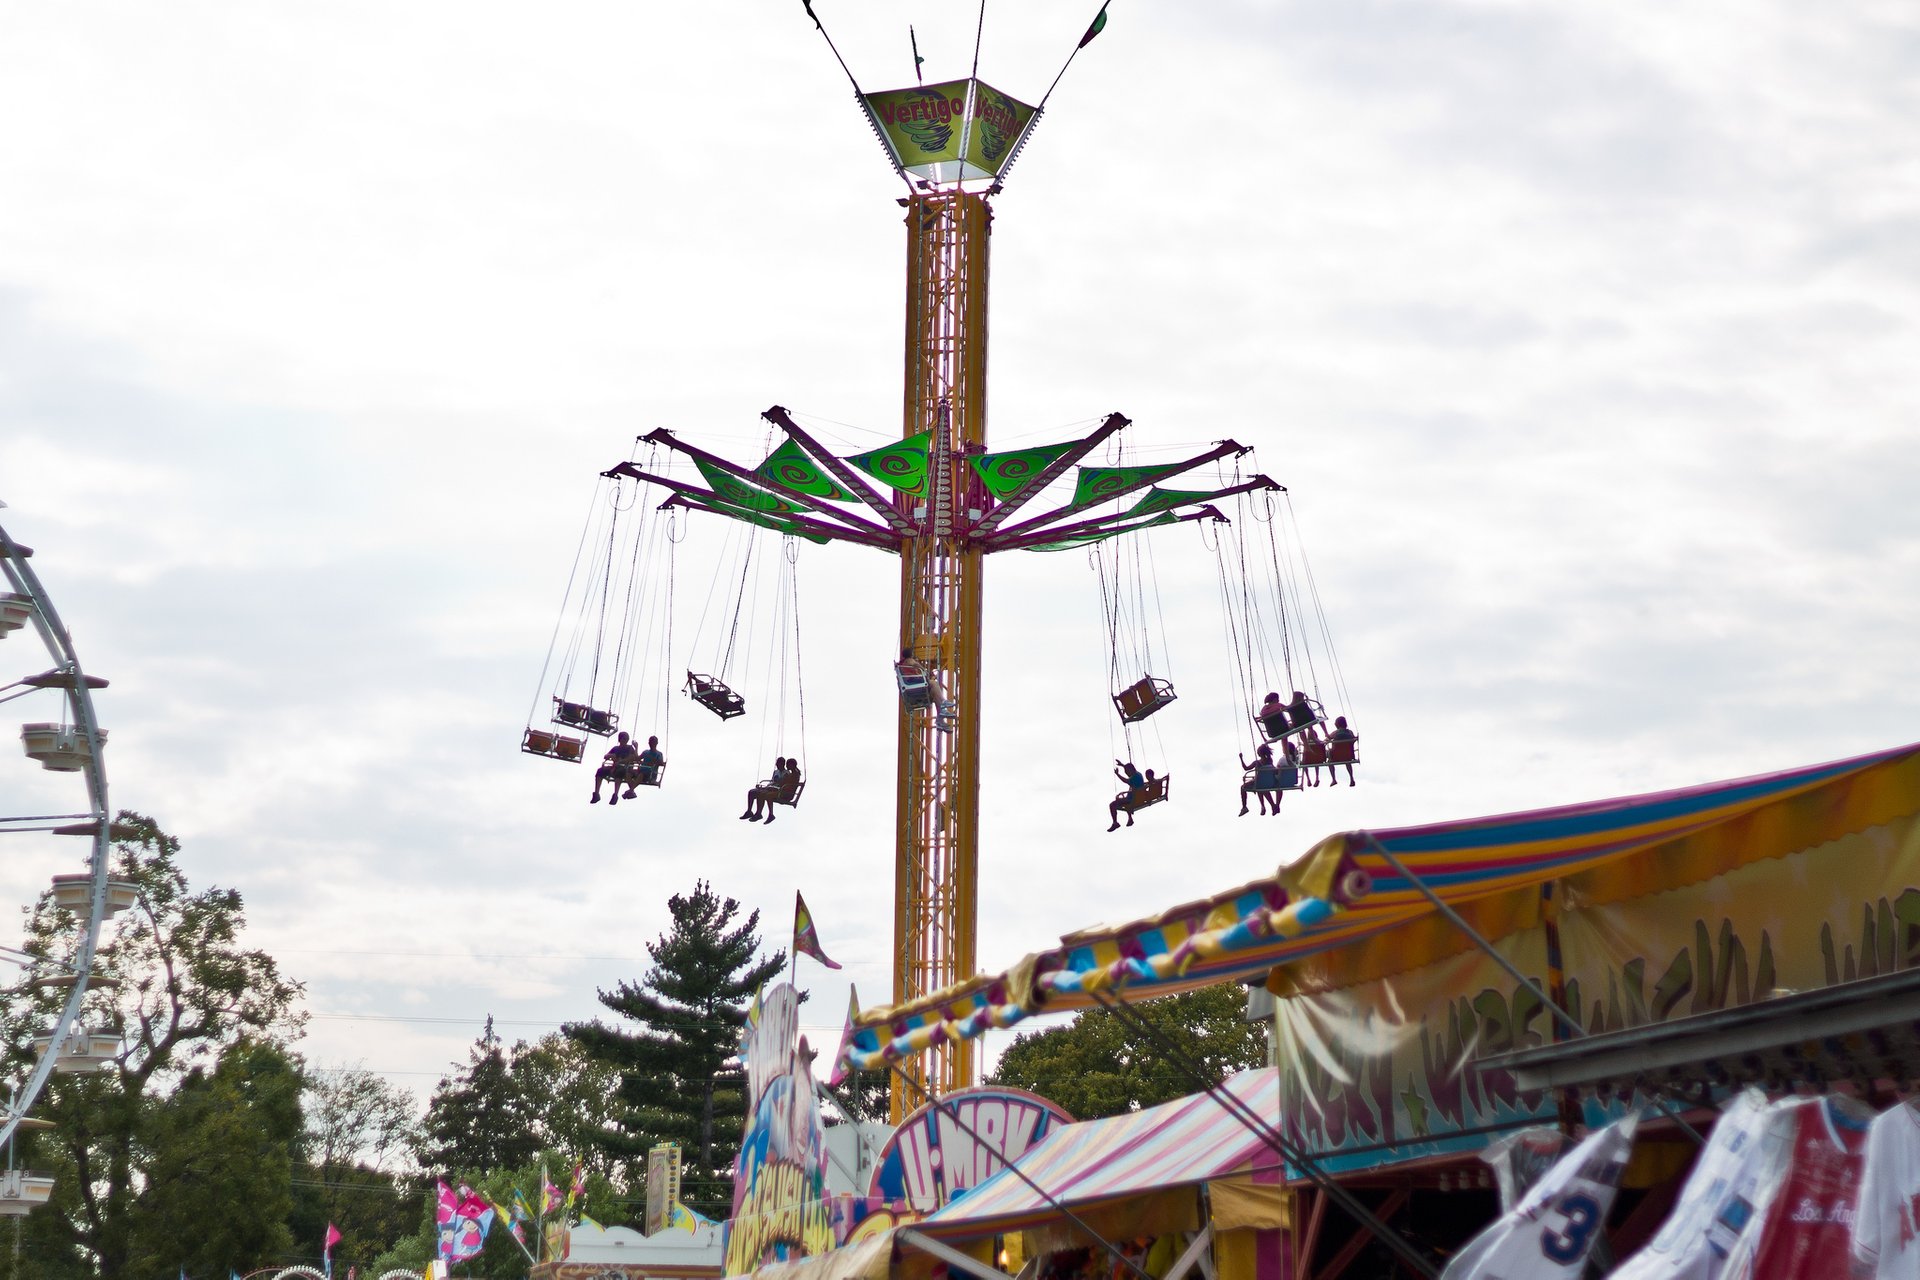 Indiana State Fair Schedule 2022 Indiana State Fair 2022 In Midwest - Dates